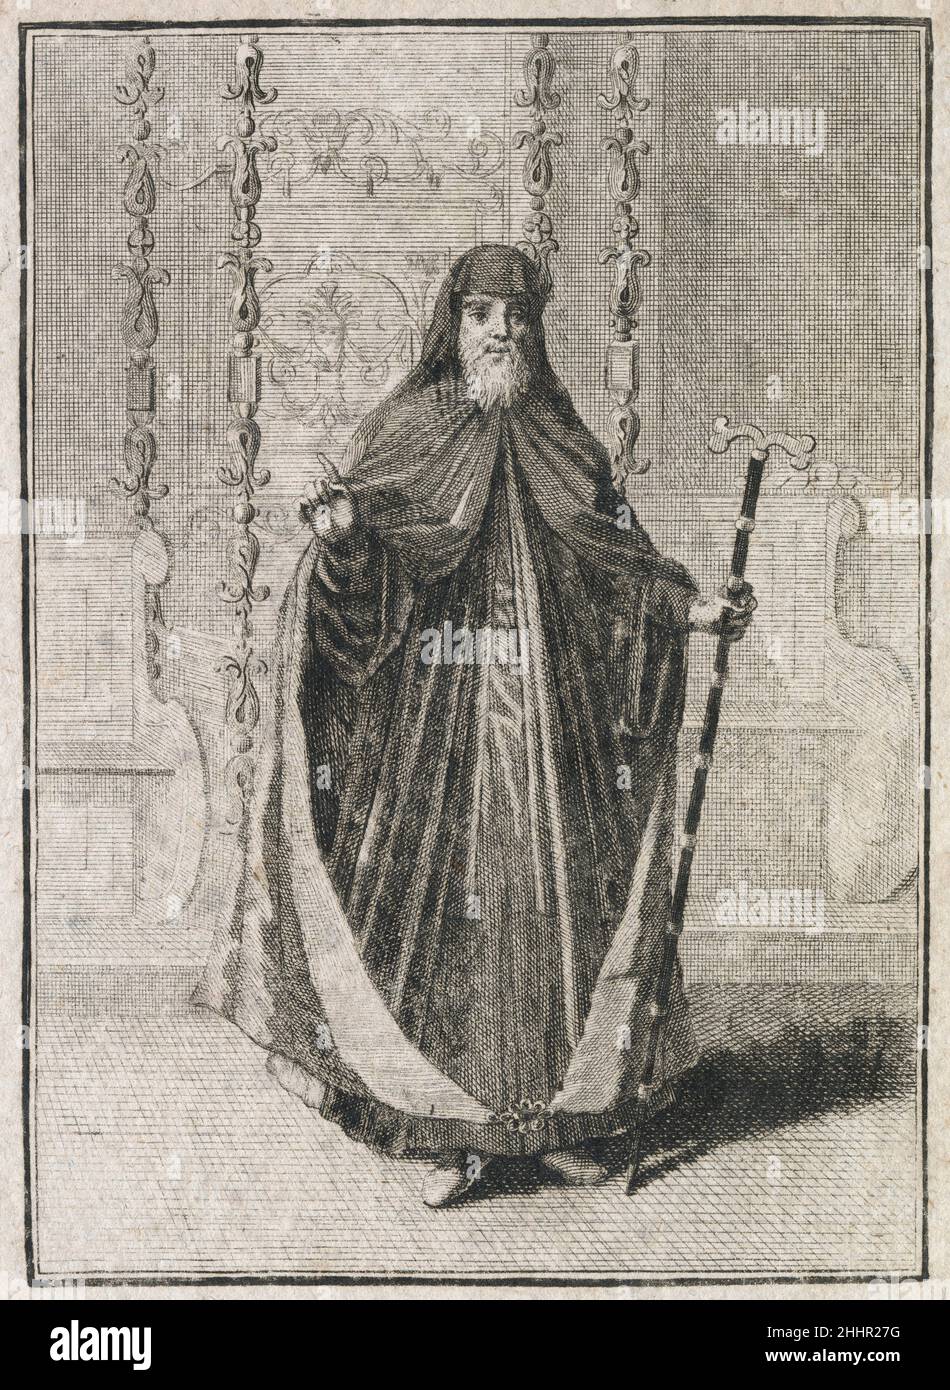 Antique 17th century engraving, 'a Patriarch of the Greeks' (Ein Patriarch derer Griechen) by Johann Christoph Weigel, known as Christoph Weigel the Elder (1654-1725). SOURCE: ORIGINAL ENGRAVING Stock Photo